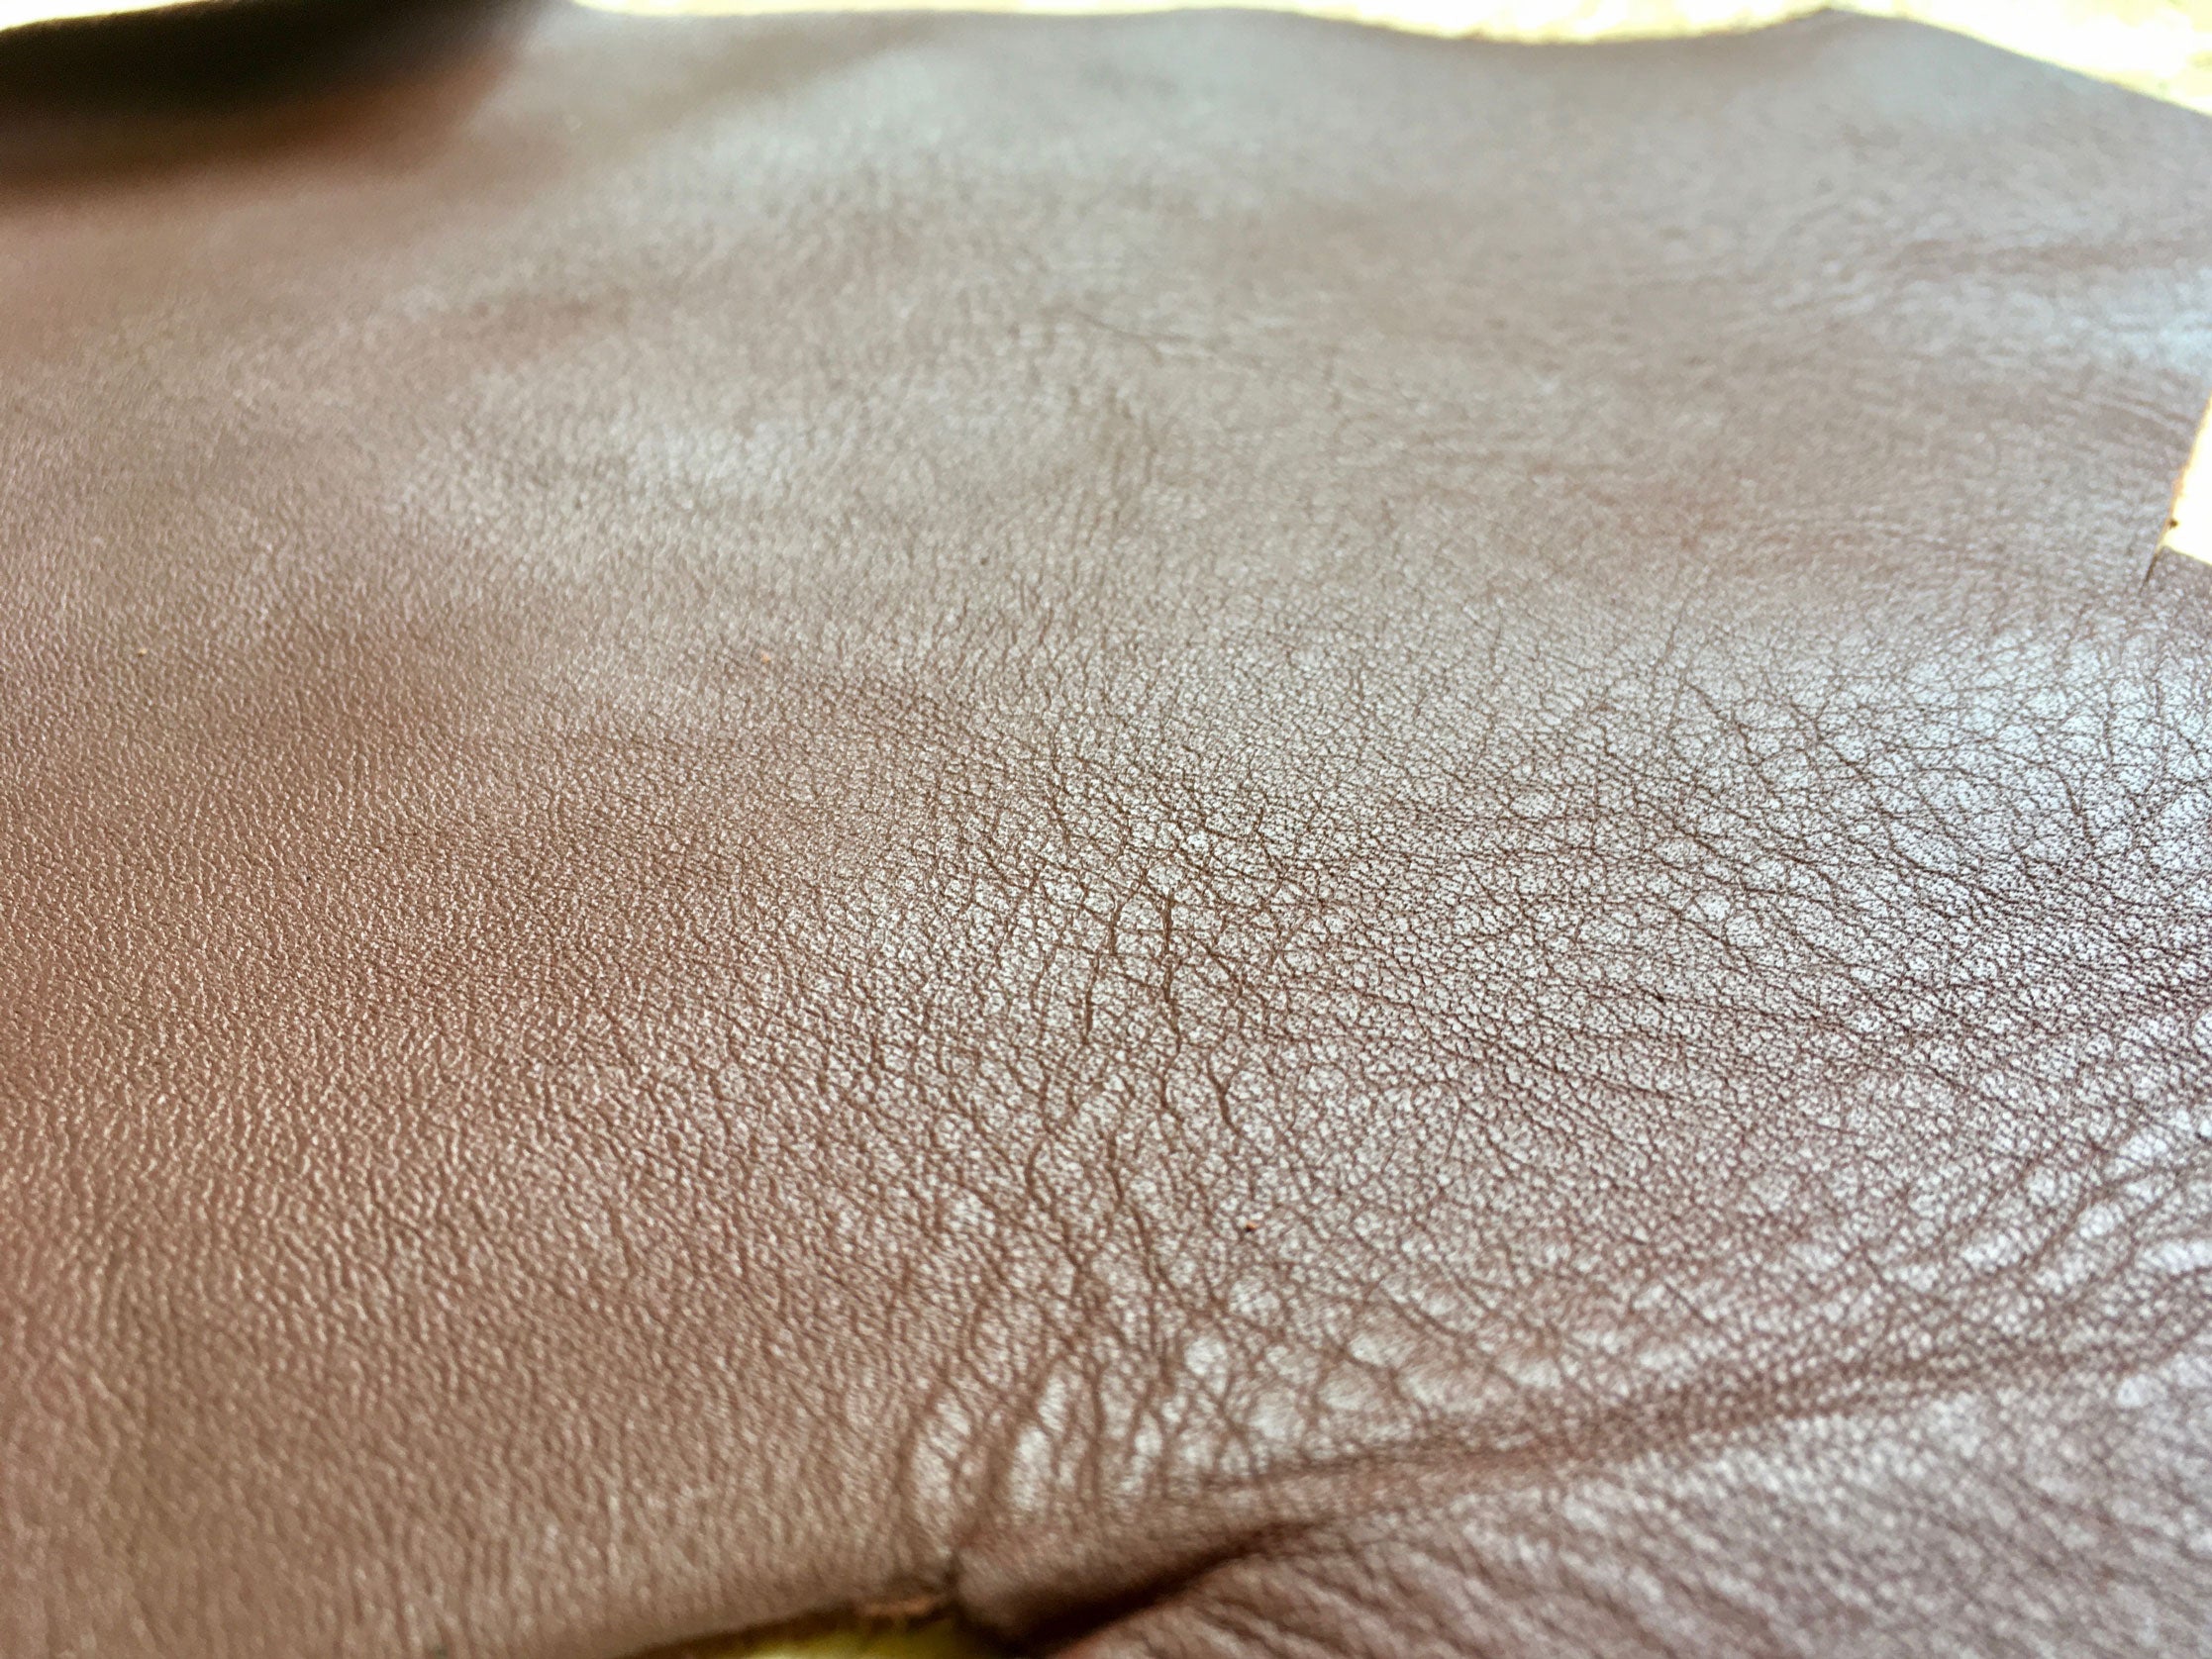 Texture of Scrap Leather Offcuts – Light Brown Cowhide Leather Pieces by Bookshell Bindery